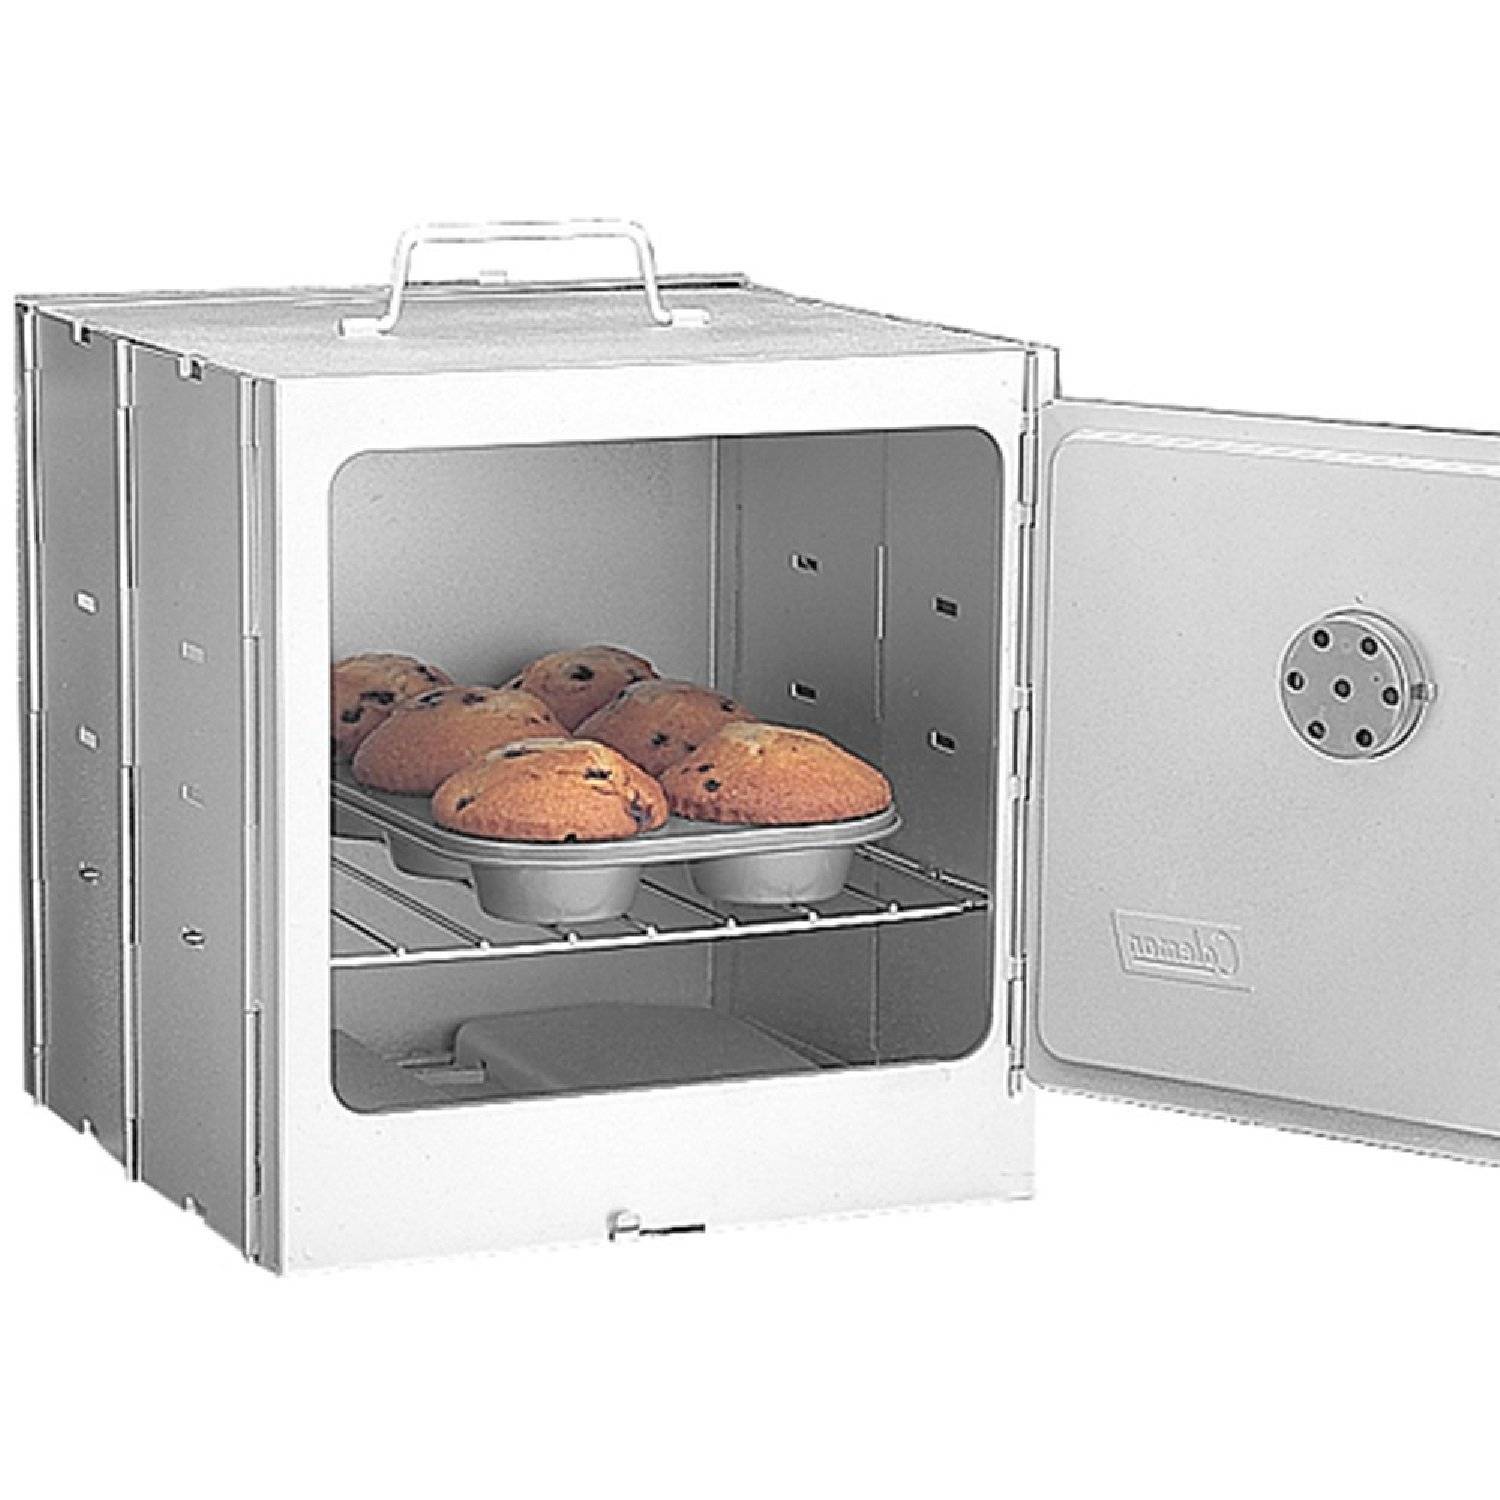 Coleman 13.5 x 12.9 x 3.3 Inch Camp Oven